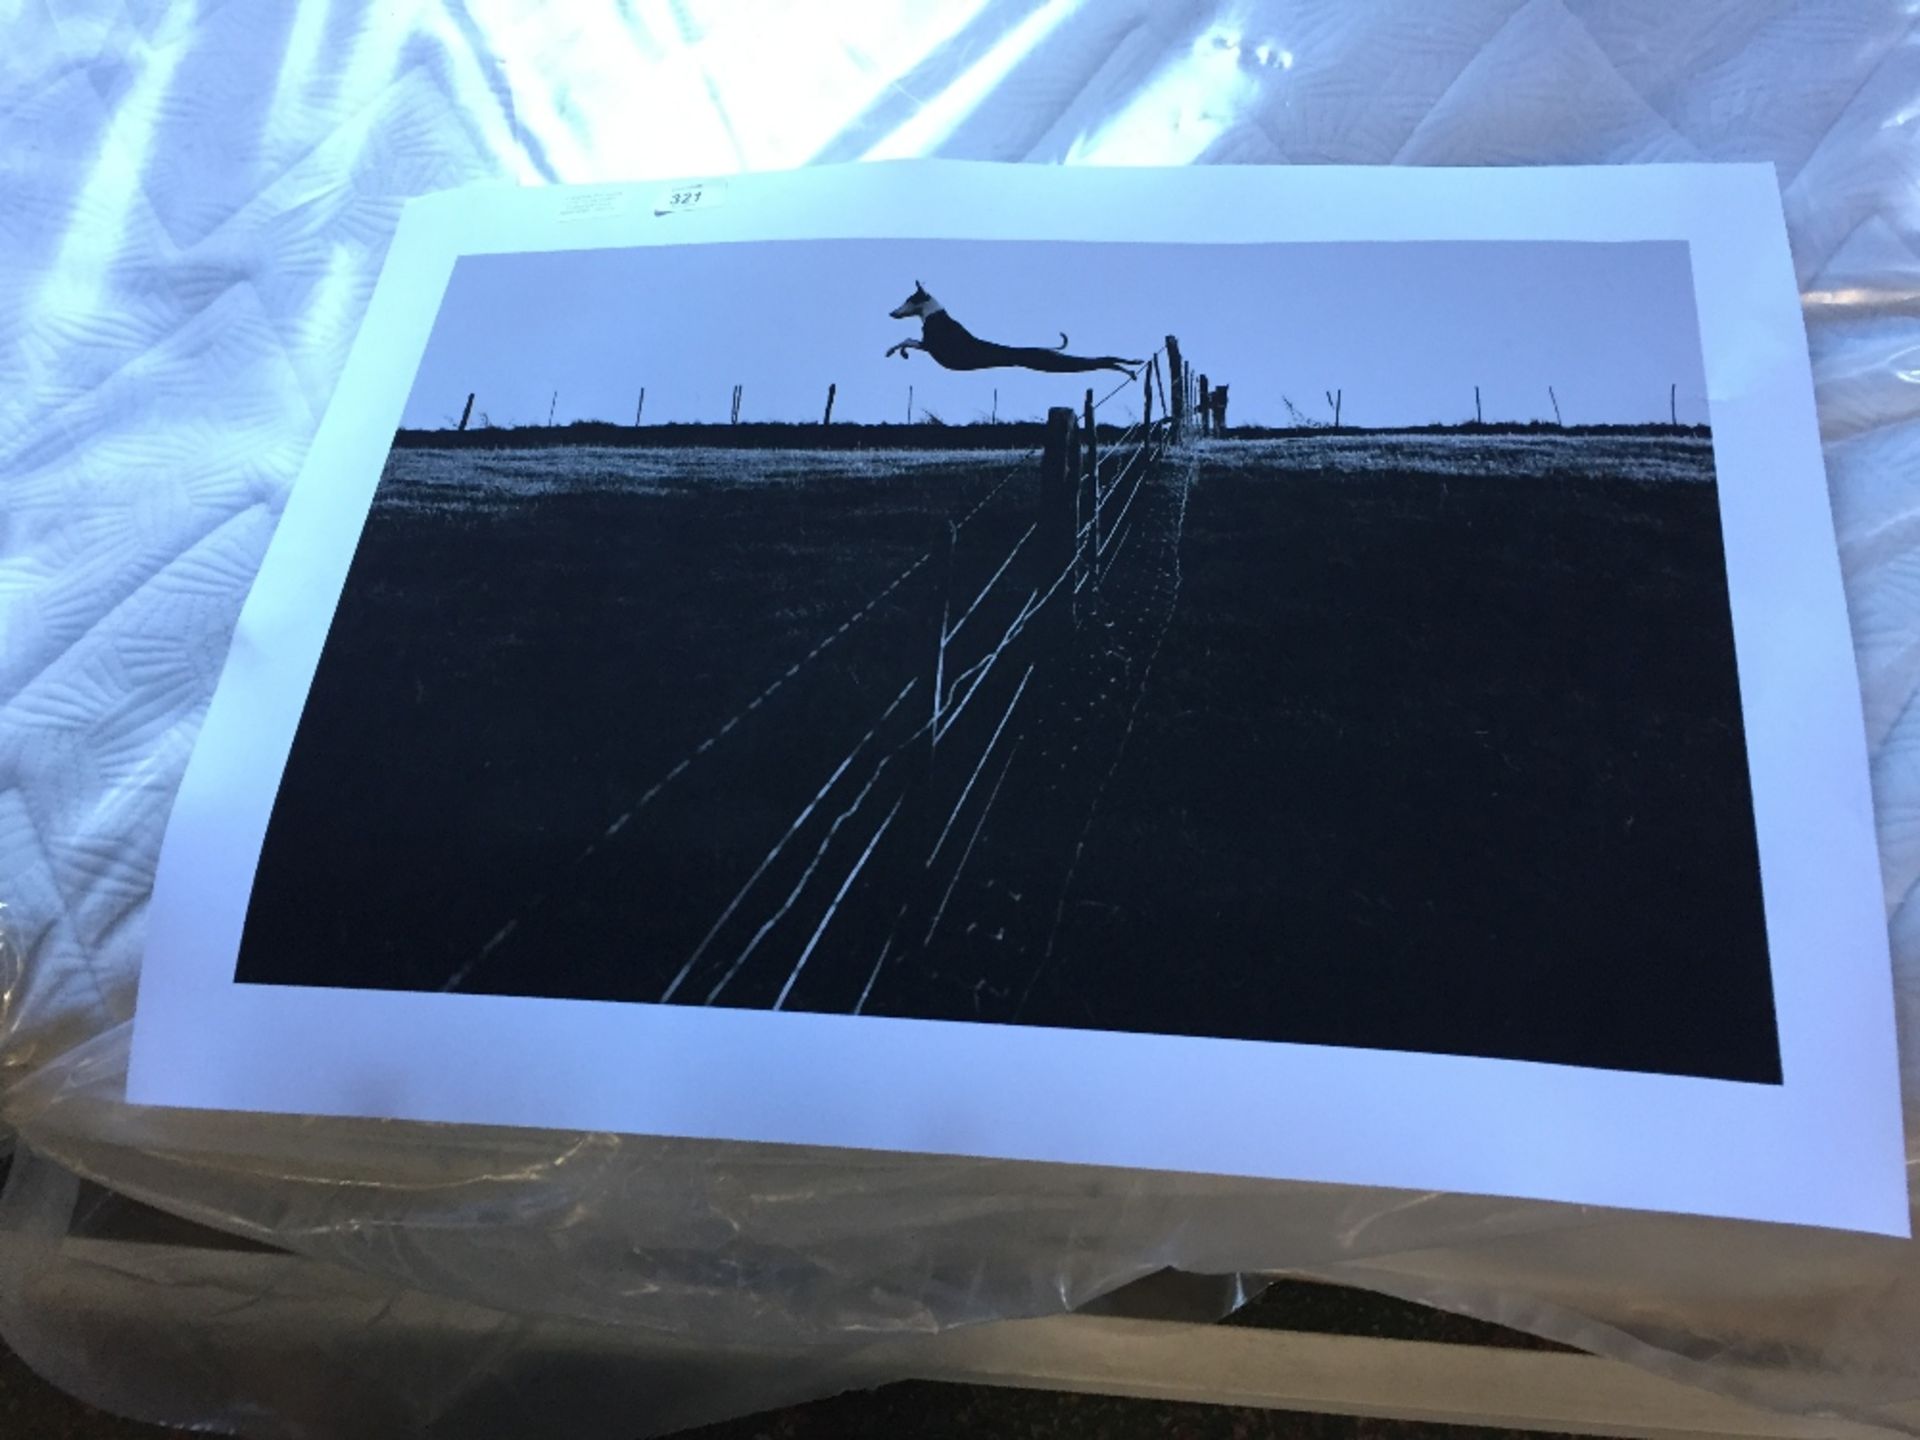 Magnolia Box Leaping Lurcher by Fay Godwin Photographic Print (MGBO9369 - 10312/3)